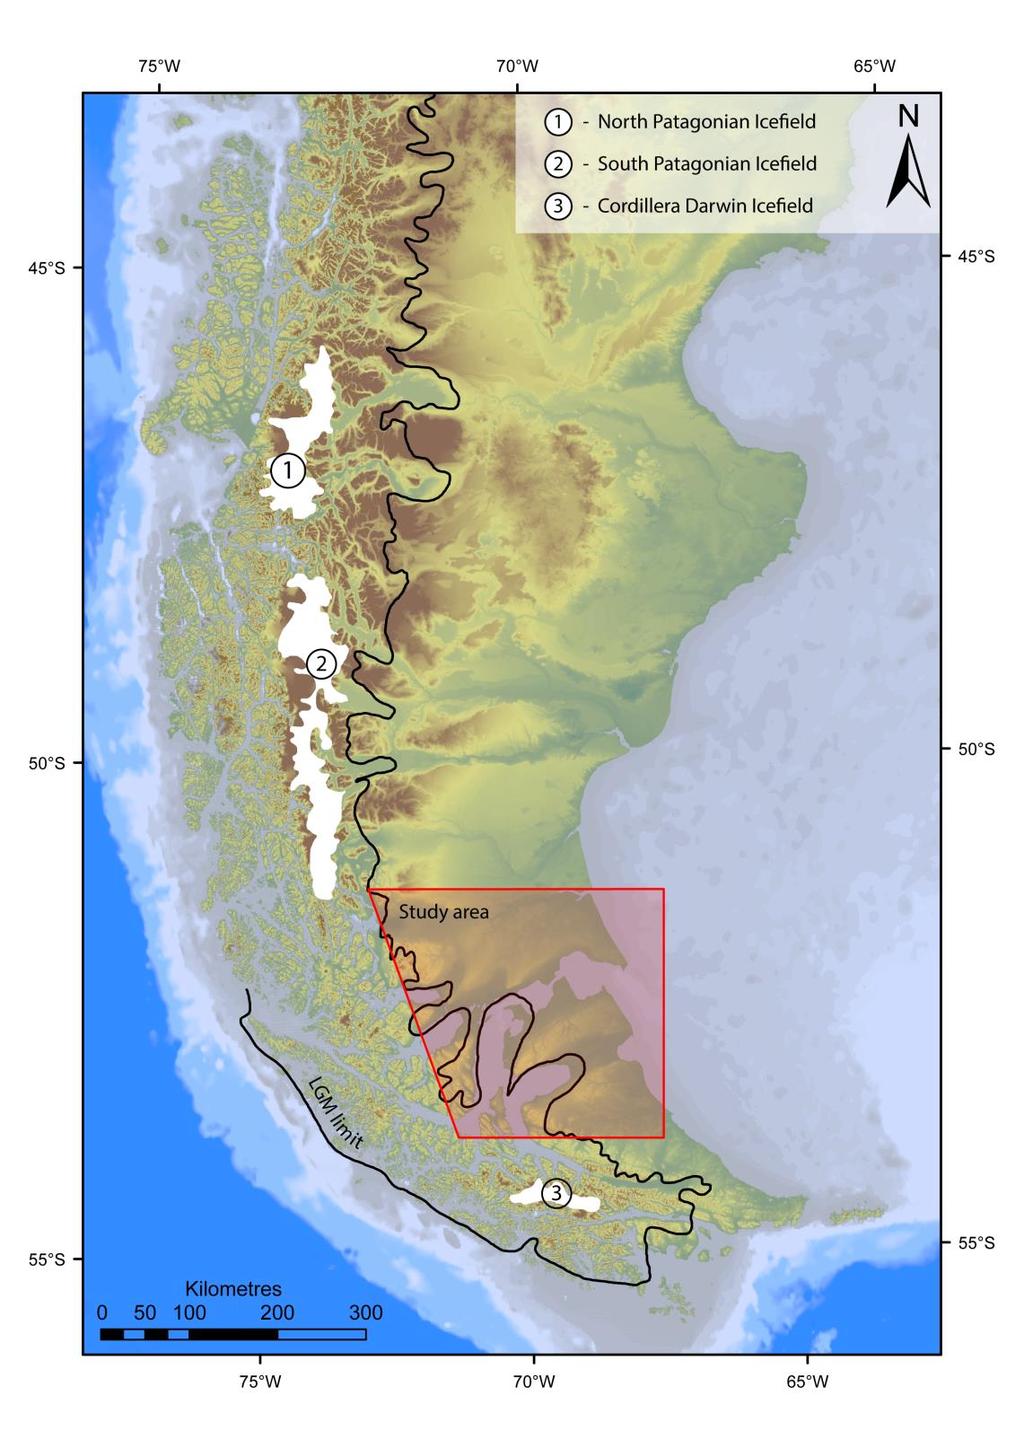 Figure 3.1. Location of the study area in southernmost Patagonia (topography shown using shaded SRTM and ETOPO data).